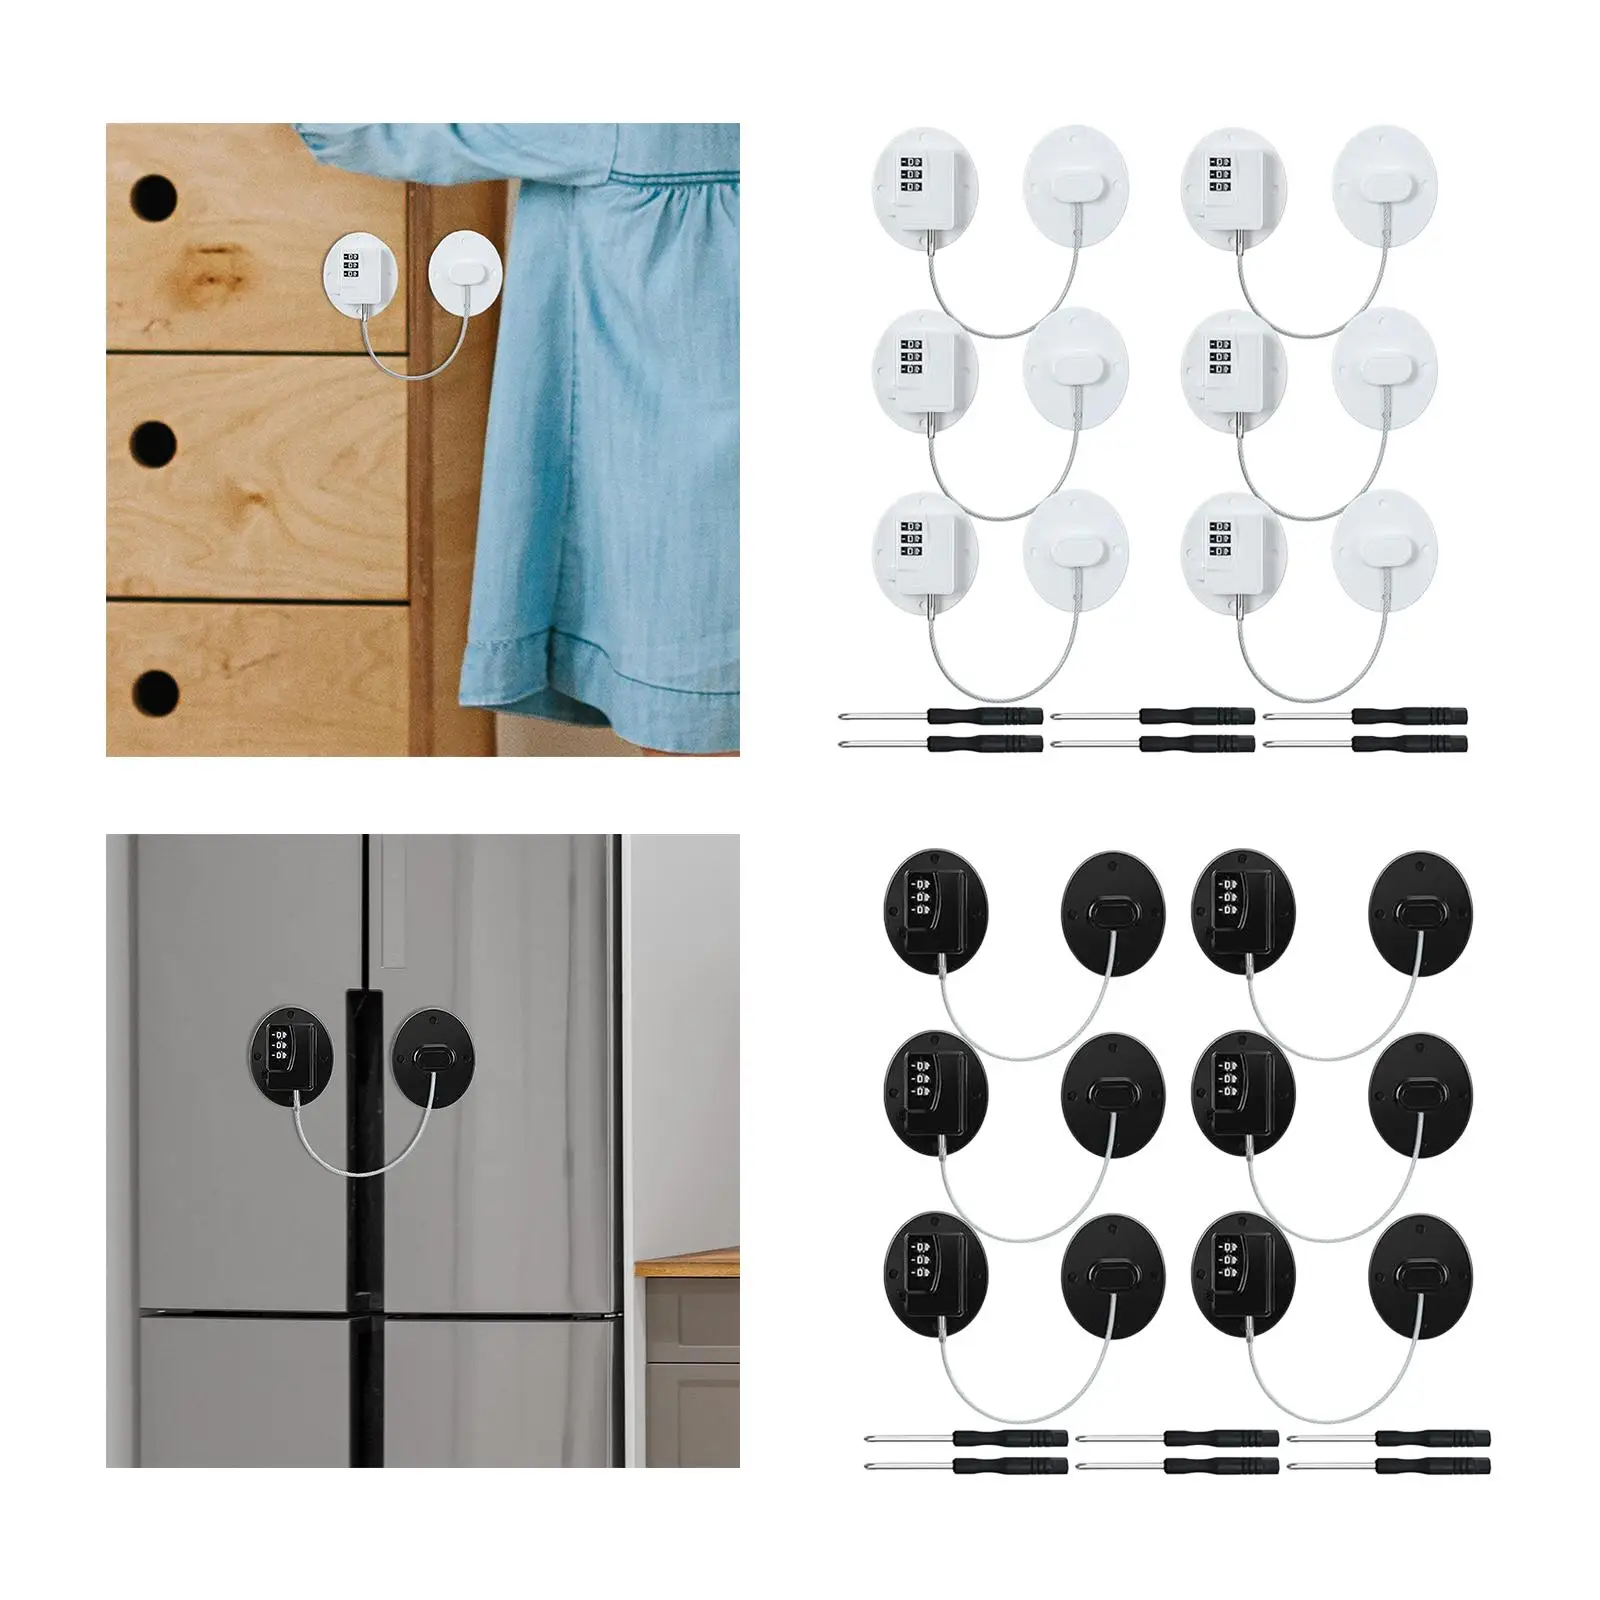 6 Pieces Drawer Locks Combination Child Safety Locks Child Safety Cabinet Lock for Refrigerators Drawers Cabinets Window Doors